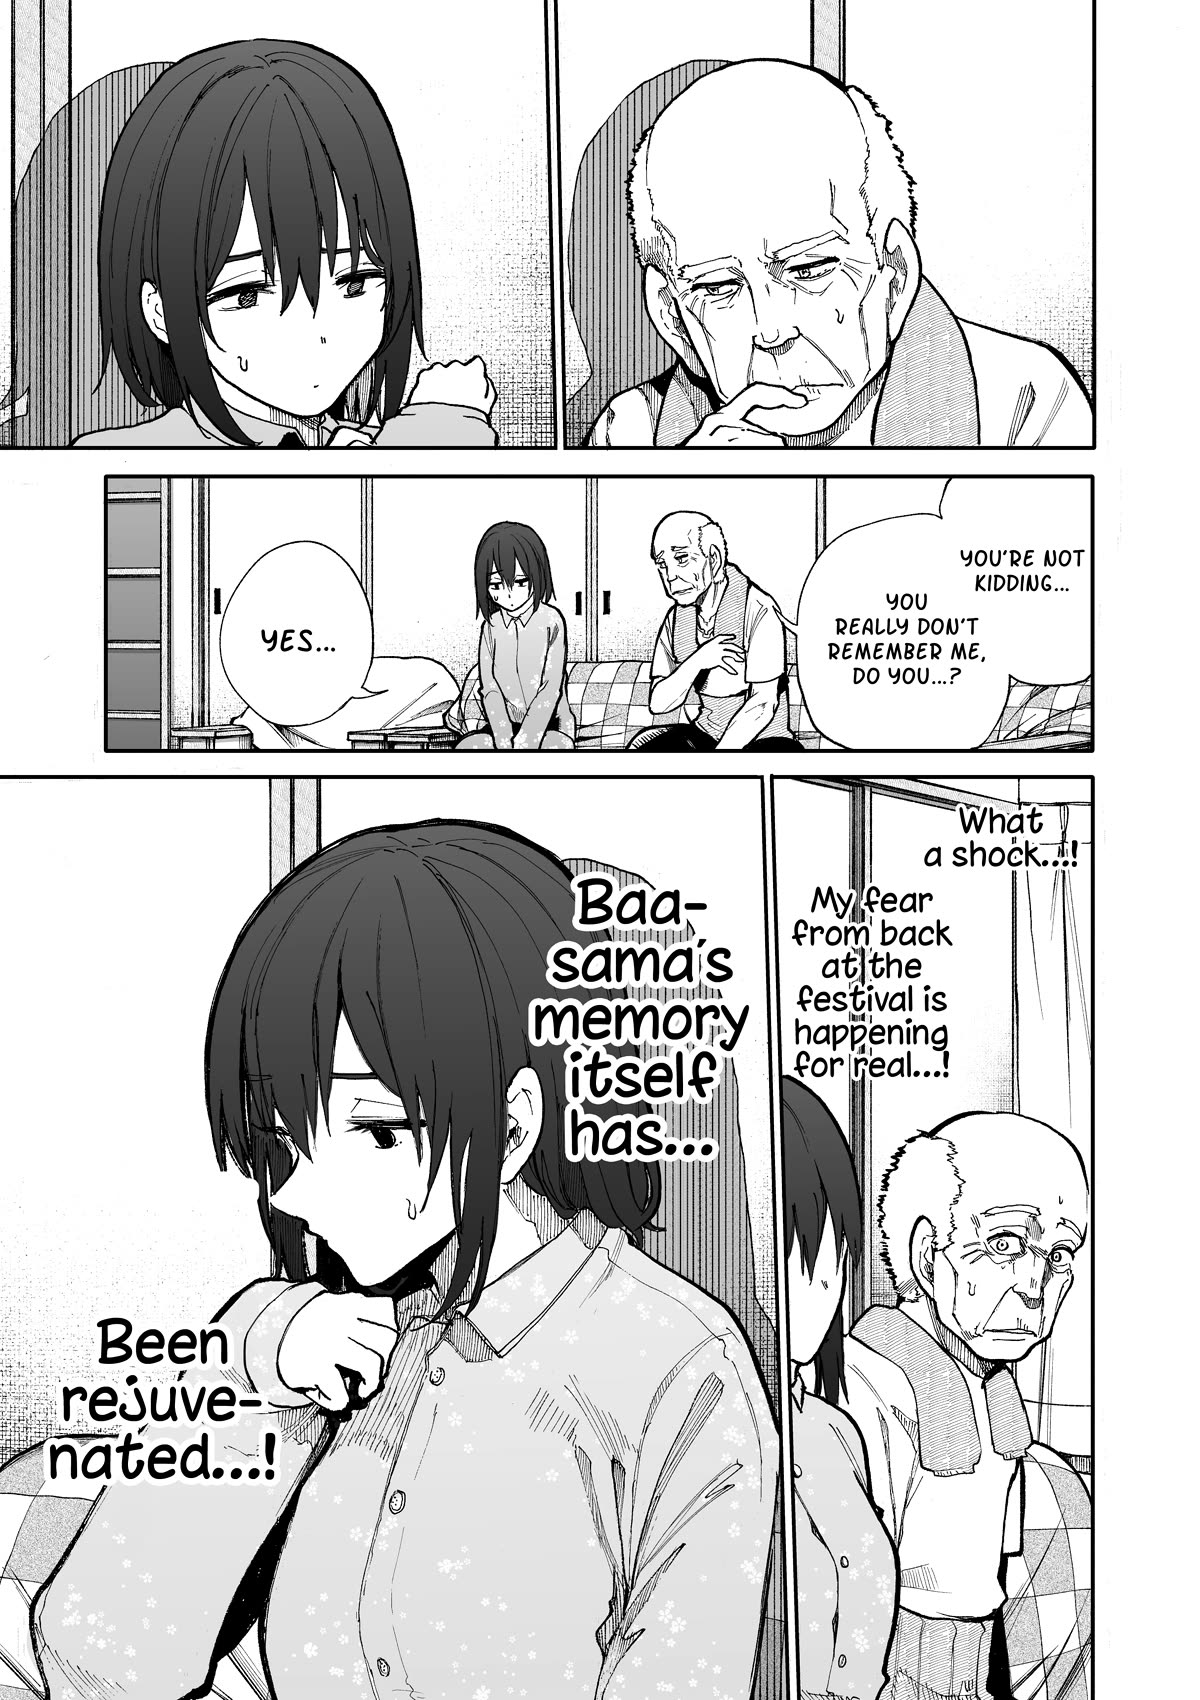 A Story About A Grampa And Granma Returned Back To Their Youth. - Page 1